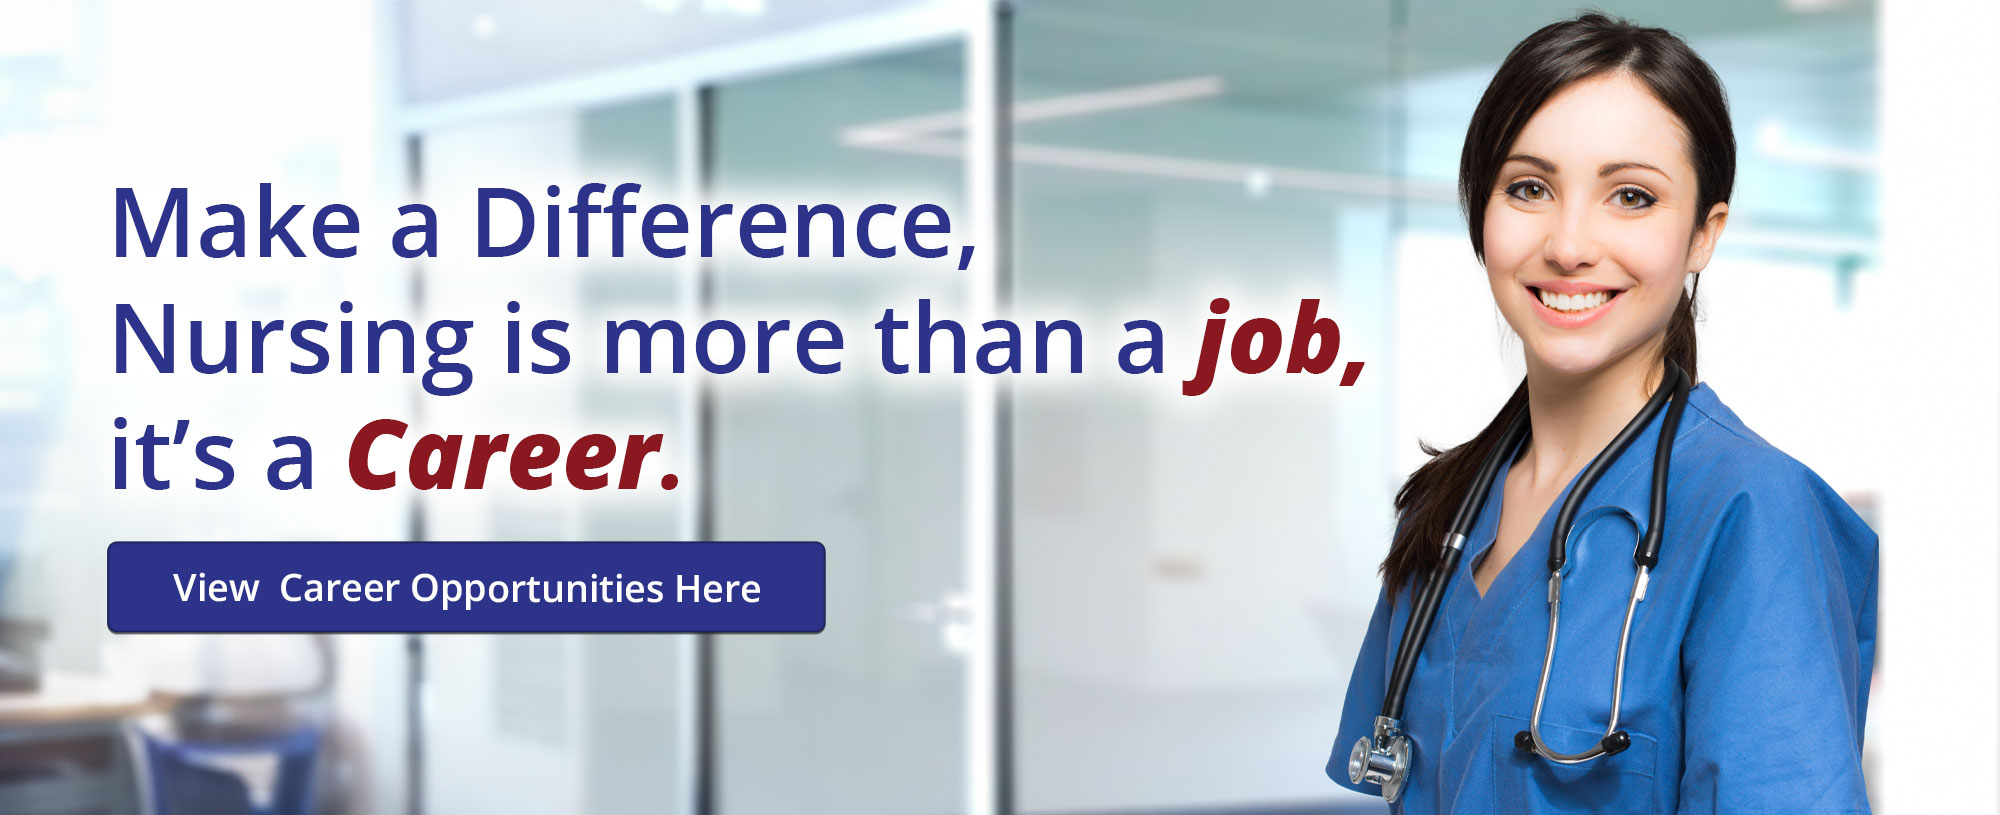 Make a Difference, Nursing is more than a job, it's a Career. View Career Opportunities Here.